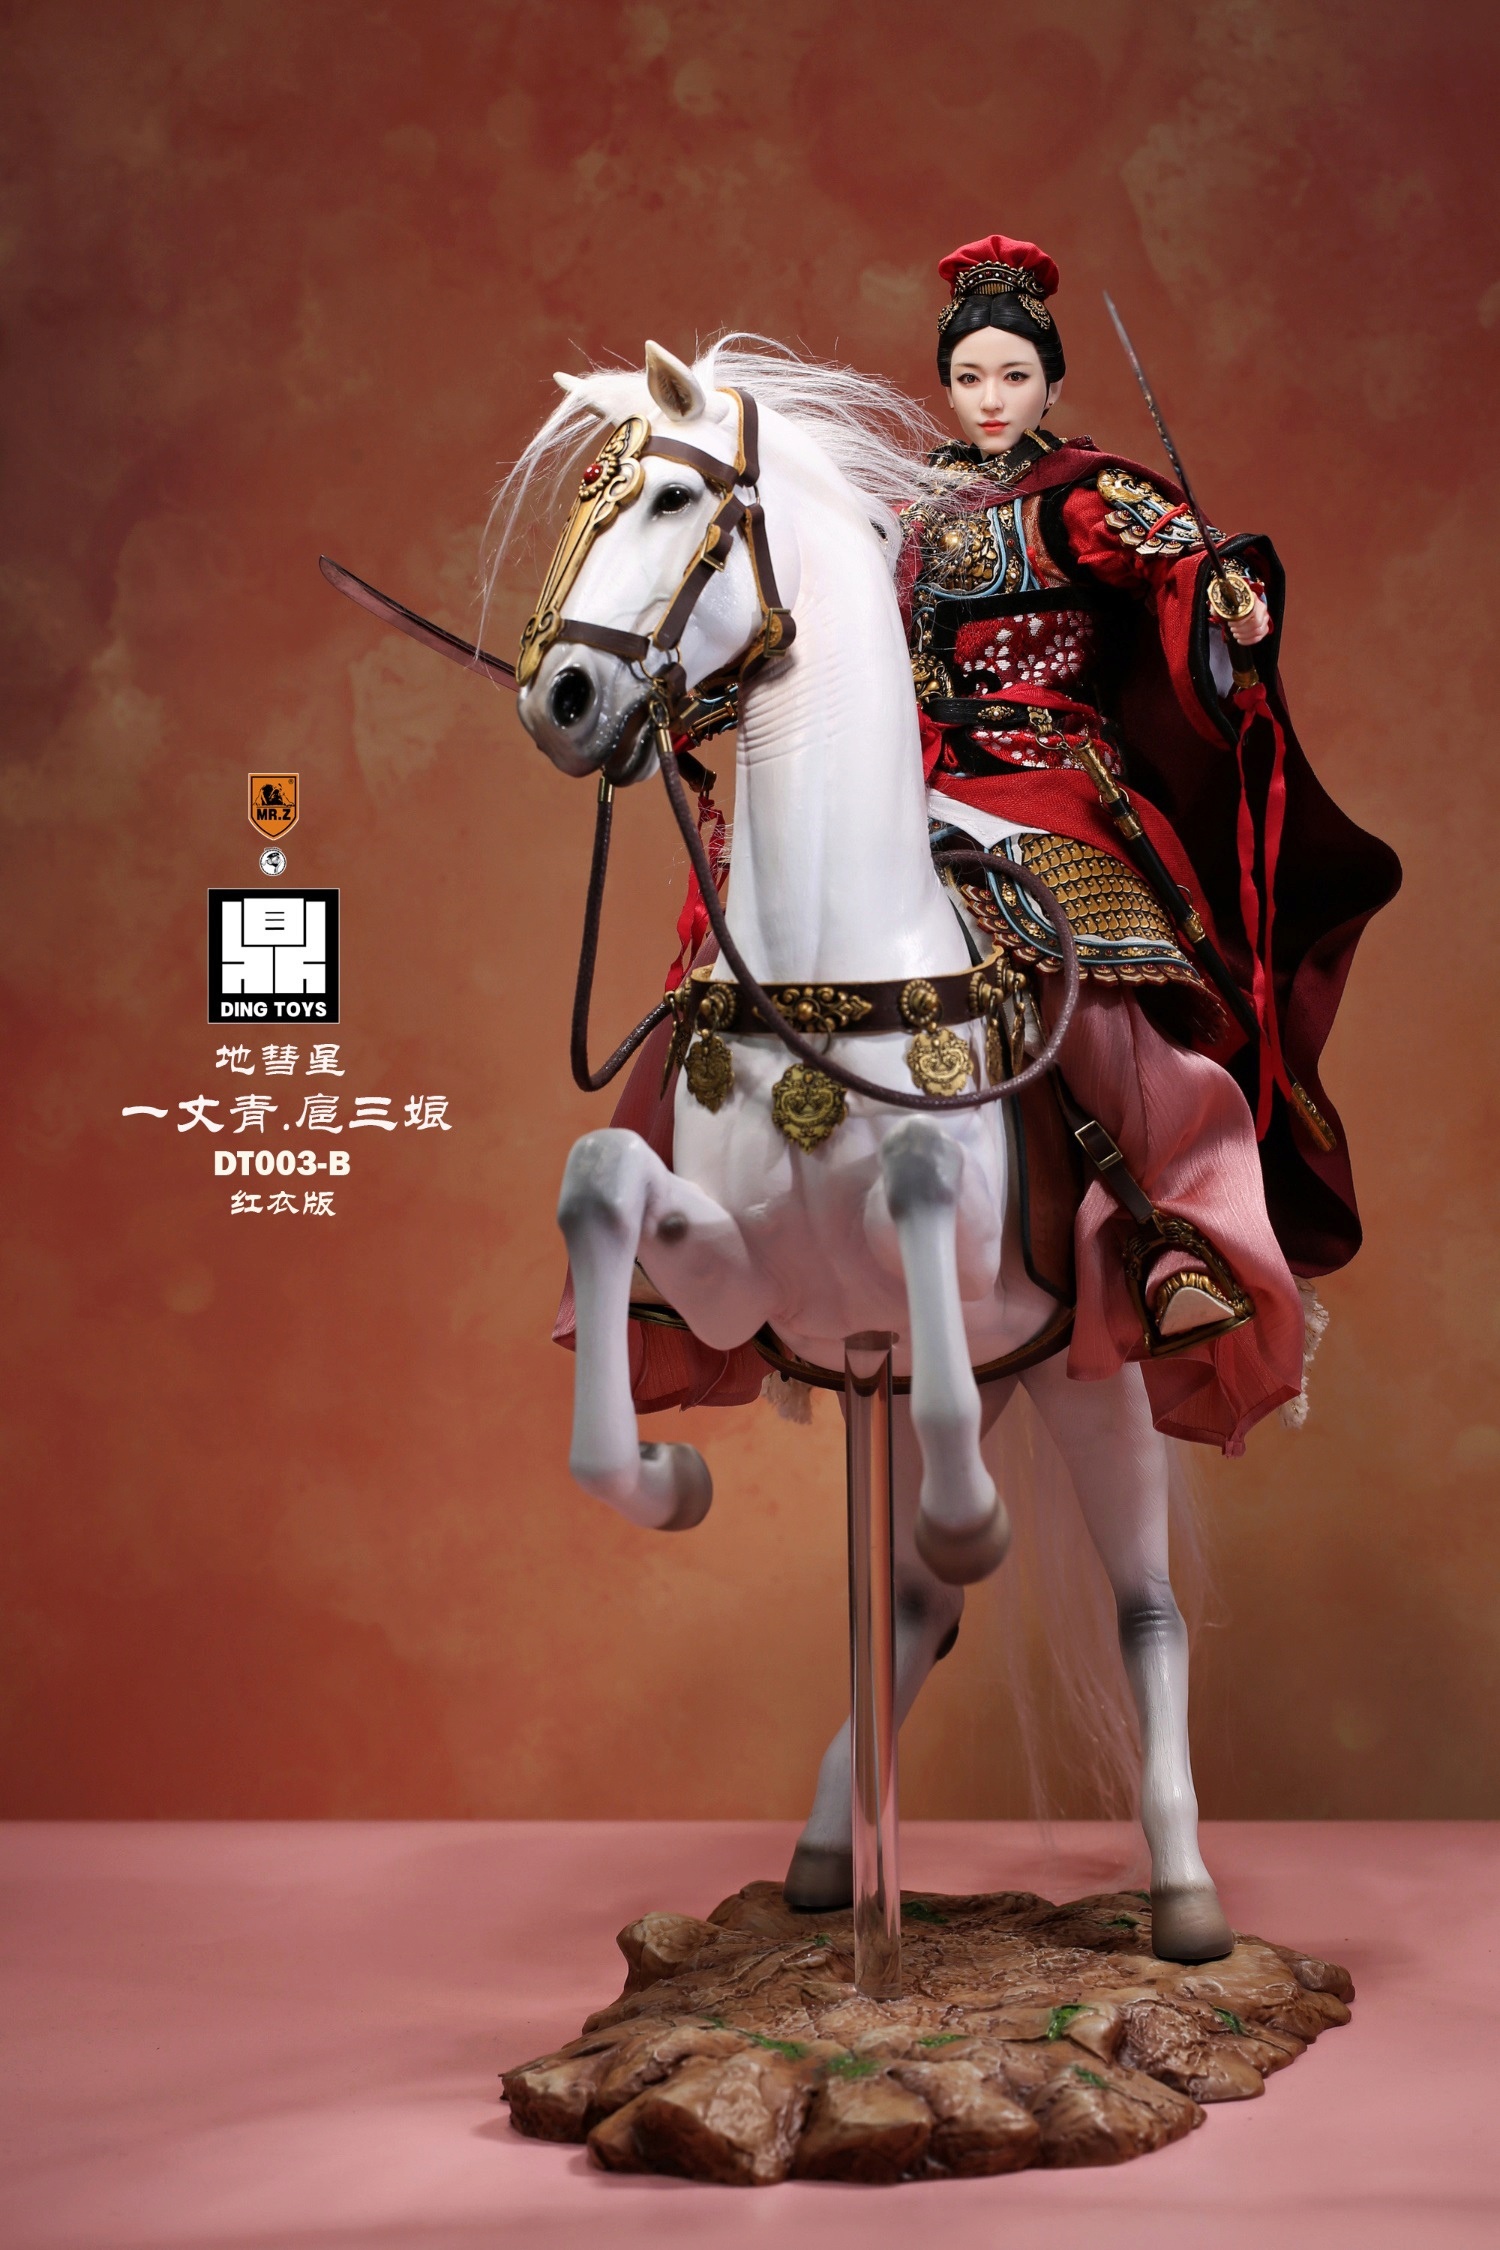 MrZ - NEW PRODUCT: Mr.Z x Ding Toys DT003 1/6 Scale 《Water Margin》Shiying Zhang (Green and Red versions), Horse (White) 4021